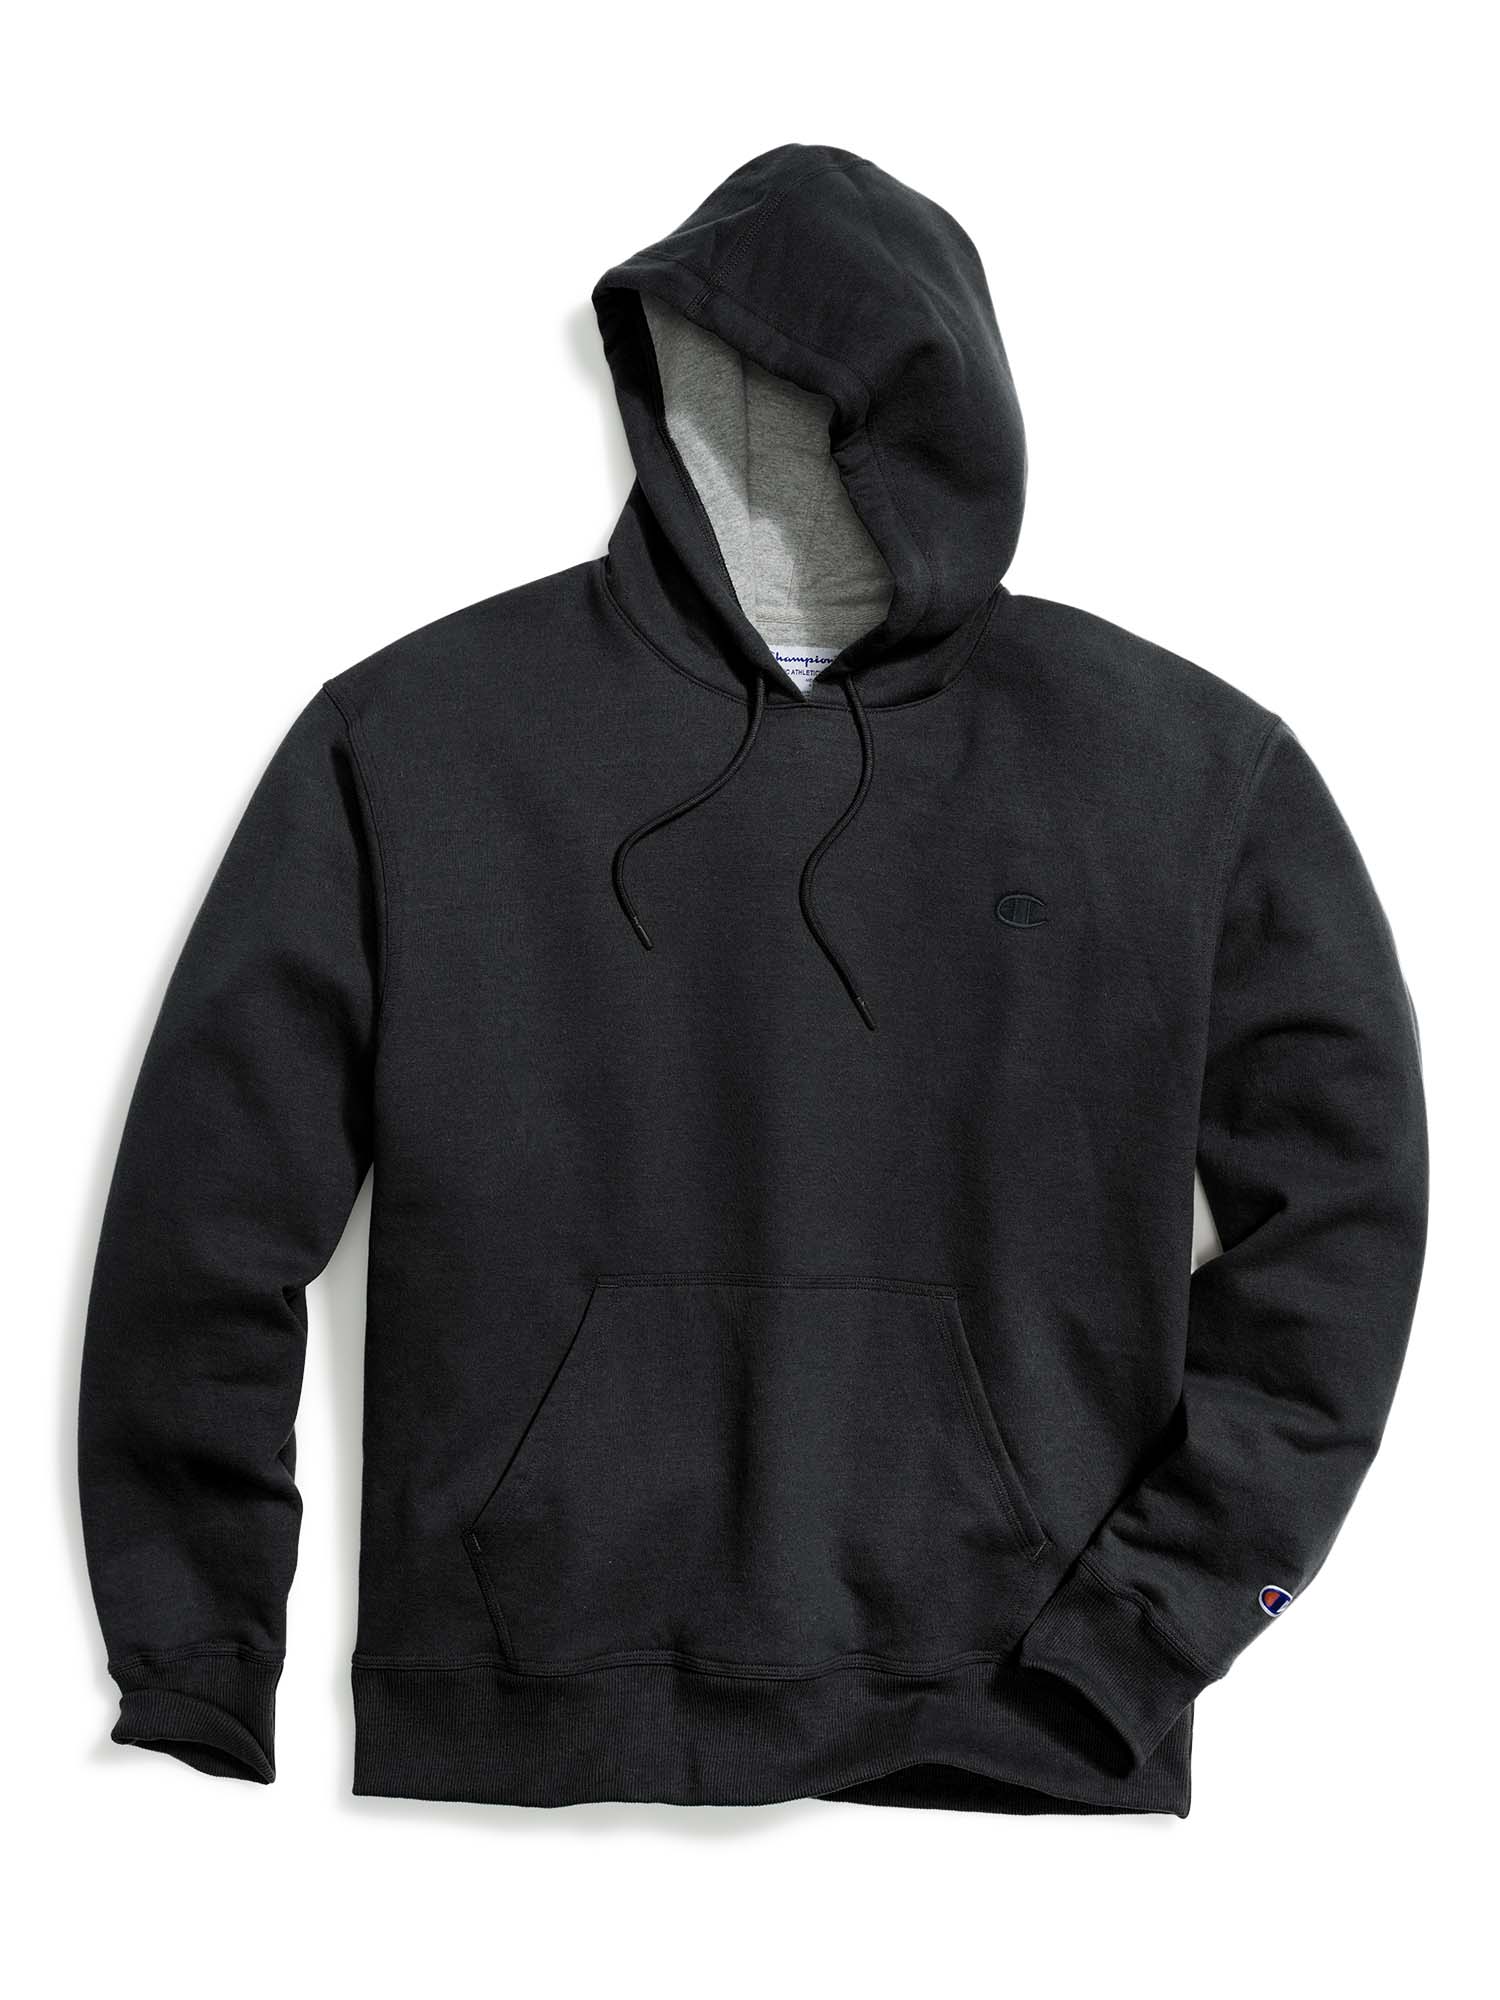 Champion Men's and Big Men's Powerblend Fleece C Logo Pullover Hoodie, up to Size 4XL - image 4 of 4